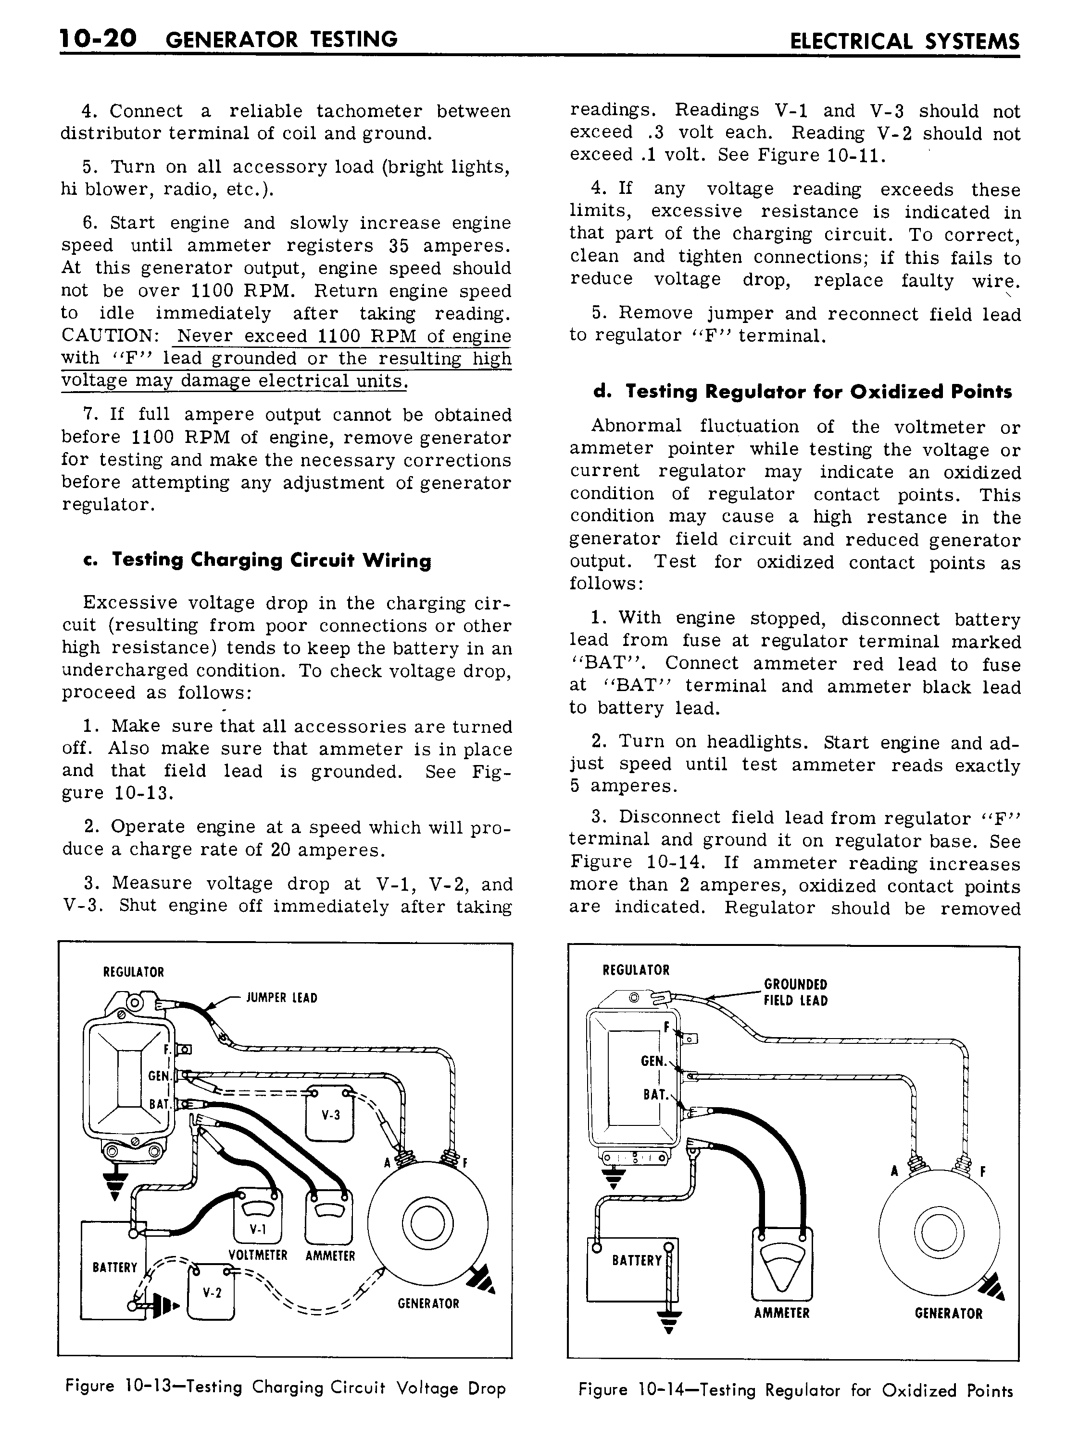 n_10 1961 Buick Shop Manual - Electrical Systems-020-020.jpg